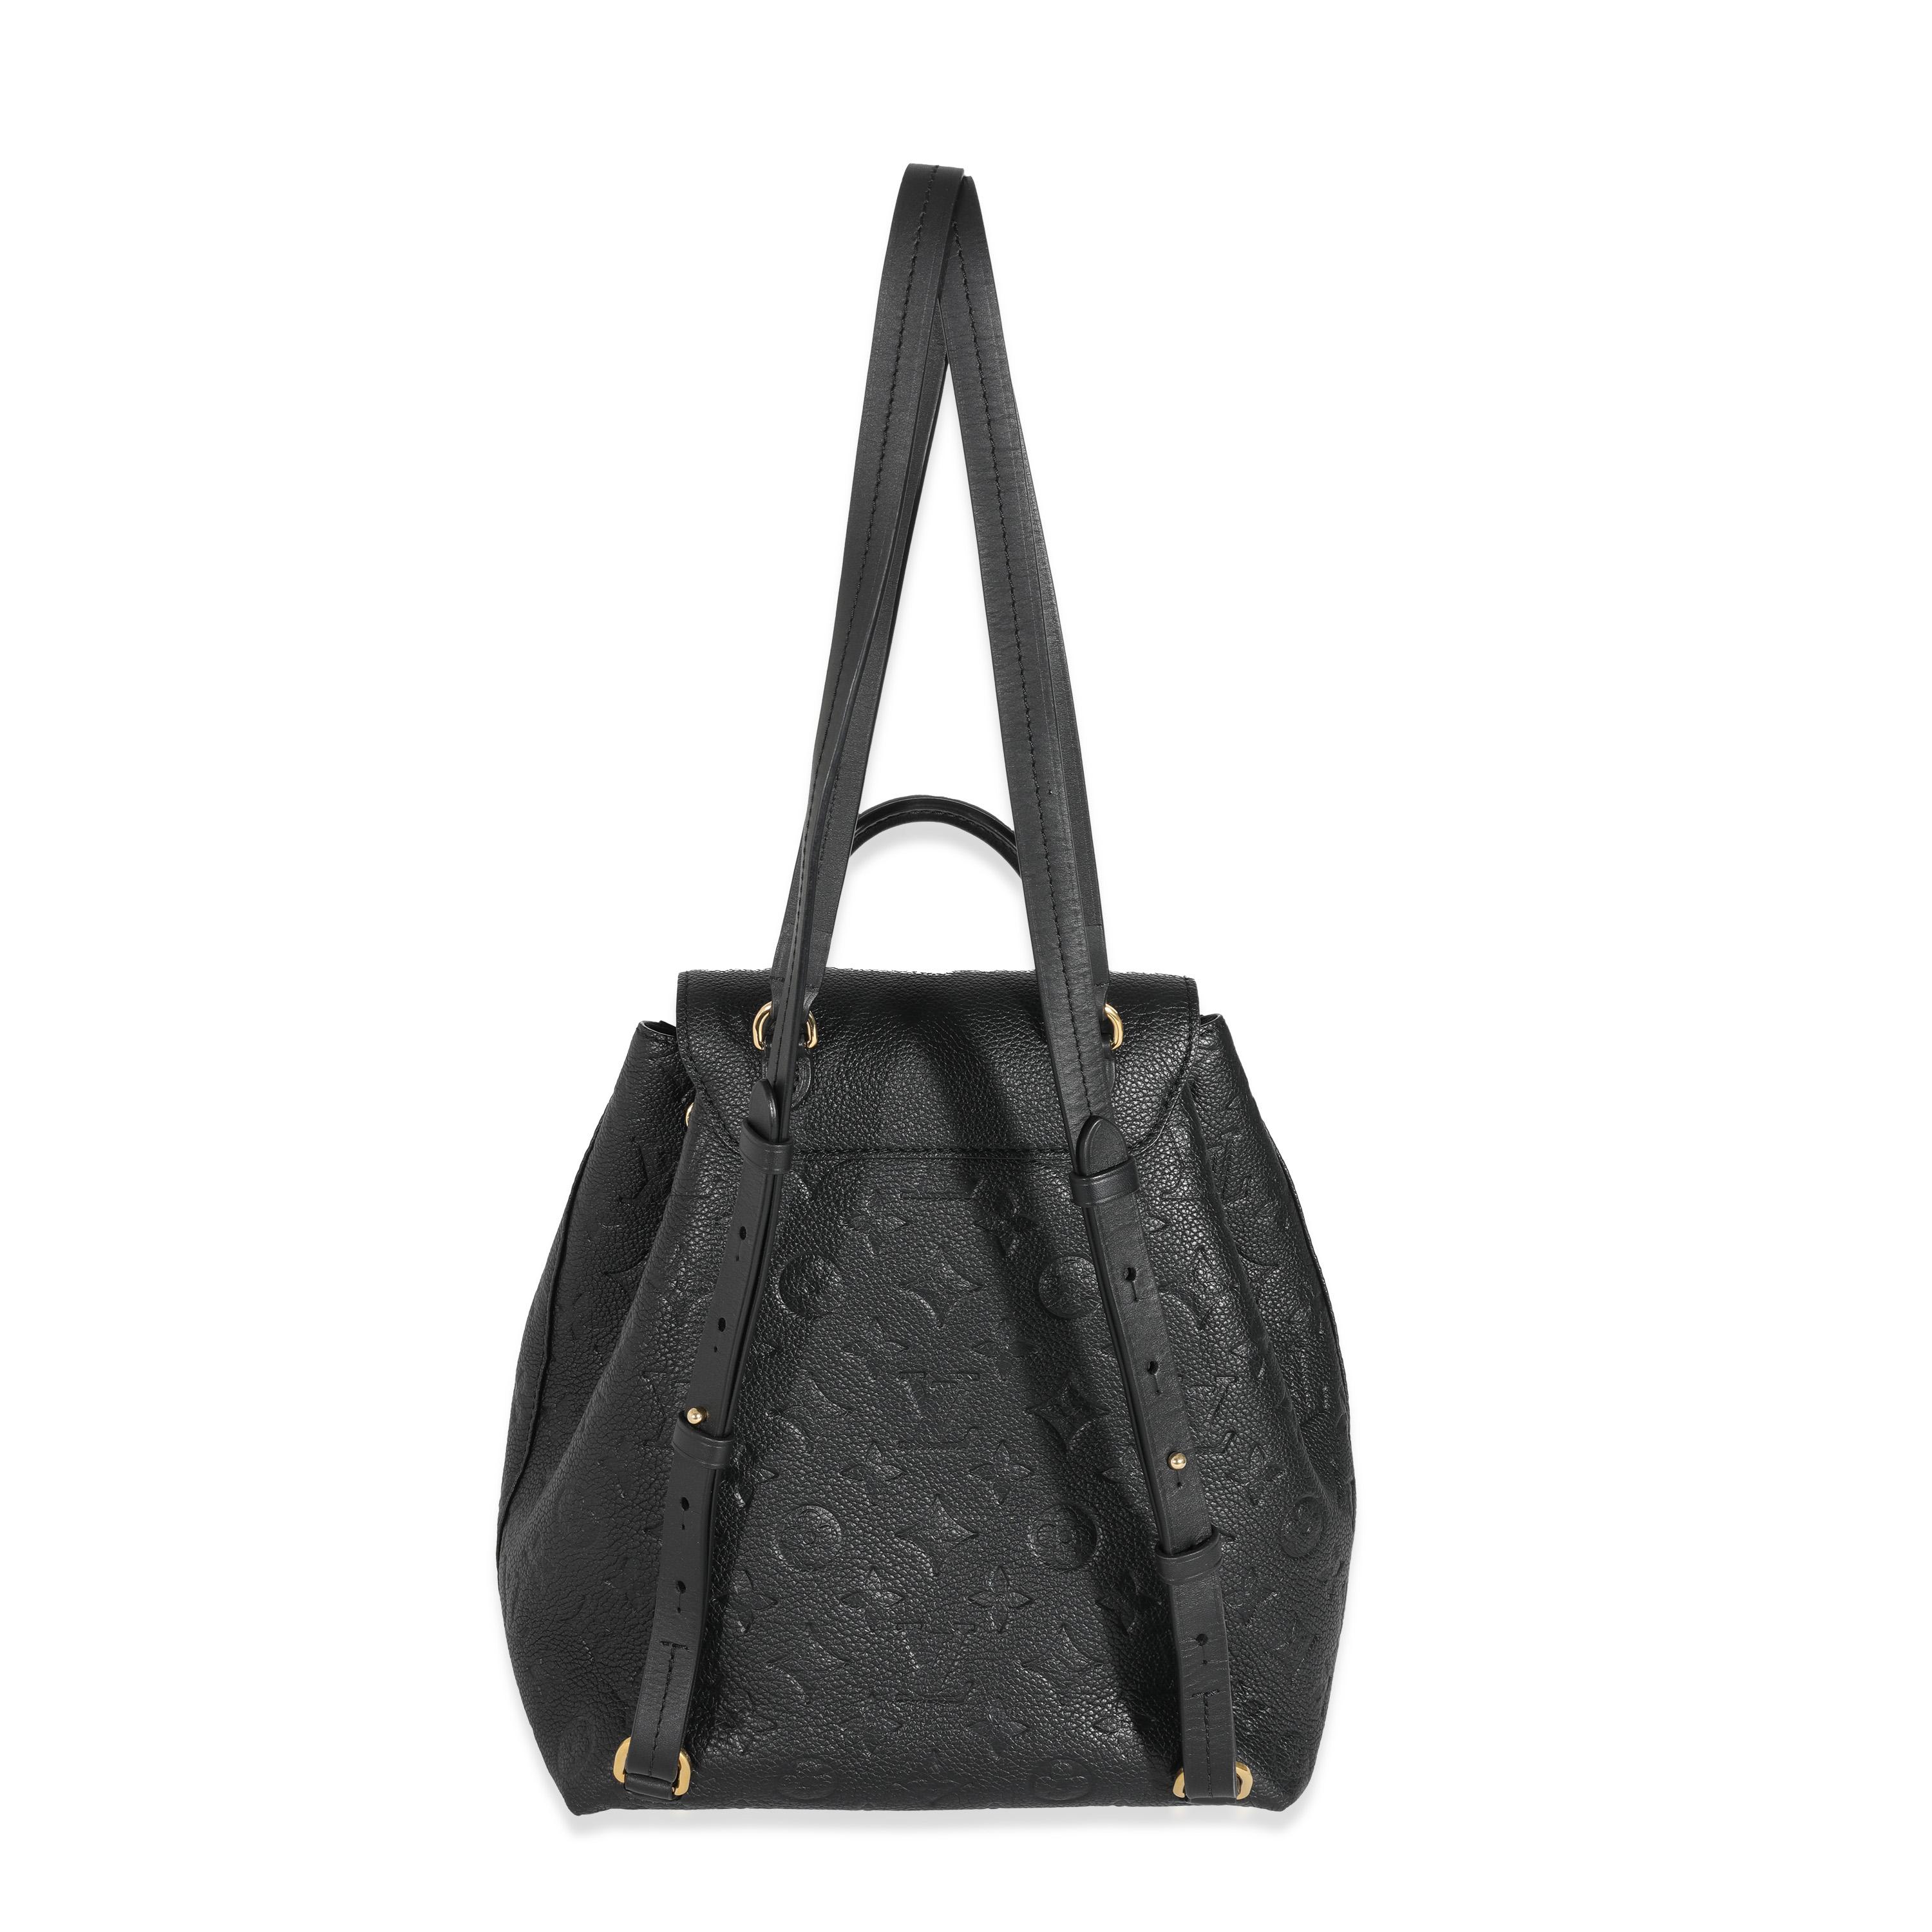 Listing Title: Louis Vuitton Black Monogram Empreinte Montsouris Backpack
SKU: 130851
MSRP: 2980.00
Condition: Pre-owned 
Handbag Condition: Very Good
Condition Comments: Item is in very good condition with minor signs of wear. Scratching and